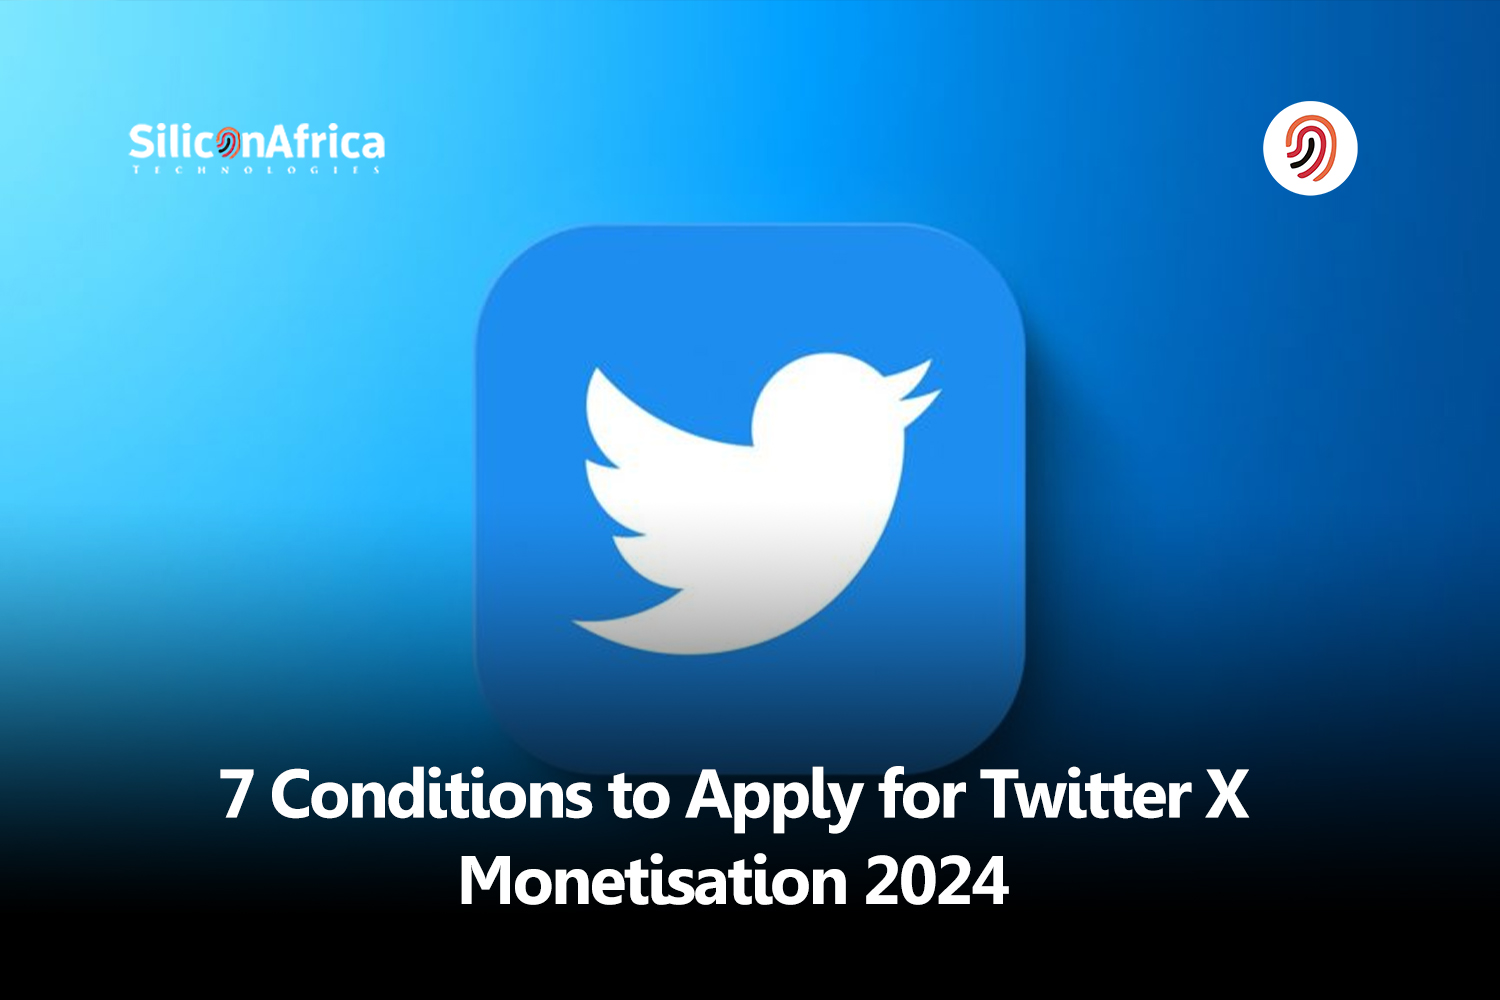 7 conditions to apply for twitter monietization